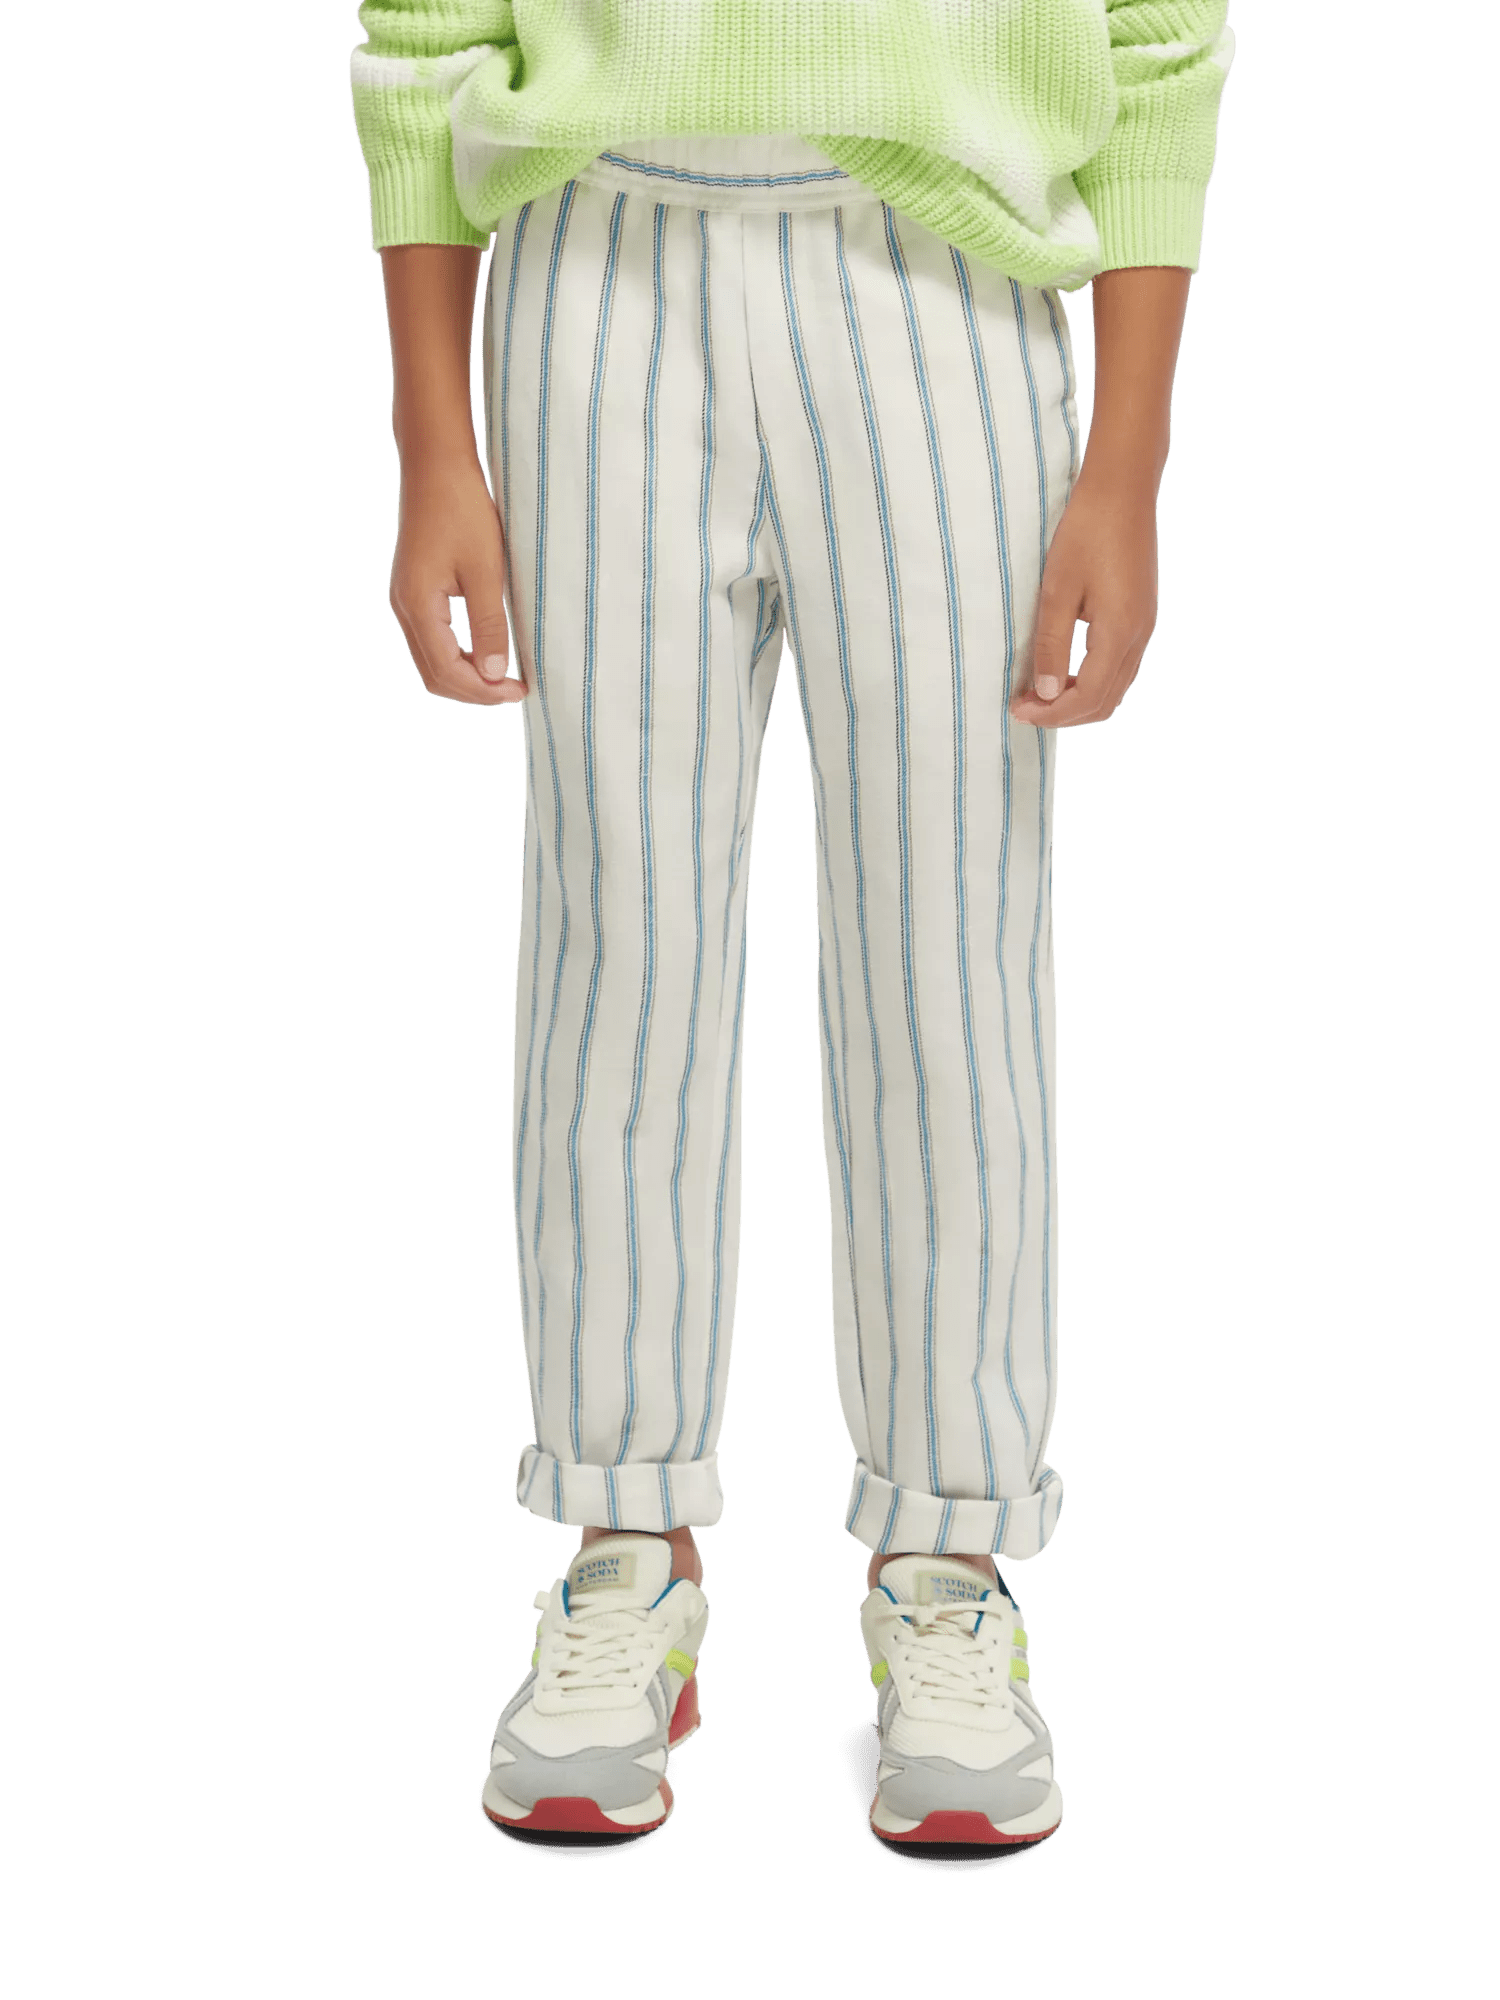 Scotch & Soda Hose im Relaxed Tapered Fit aus Leinenmischung NHD-CRP